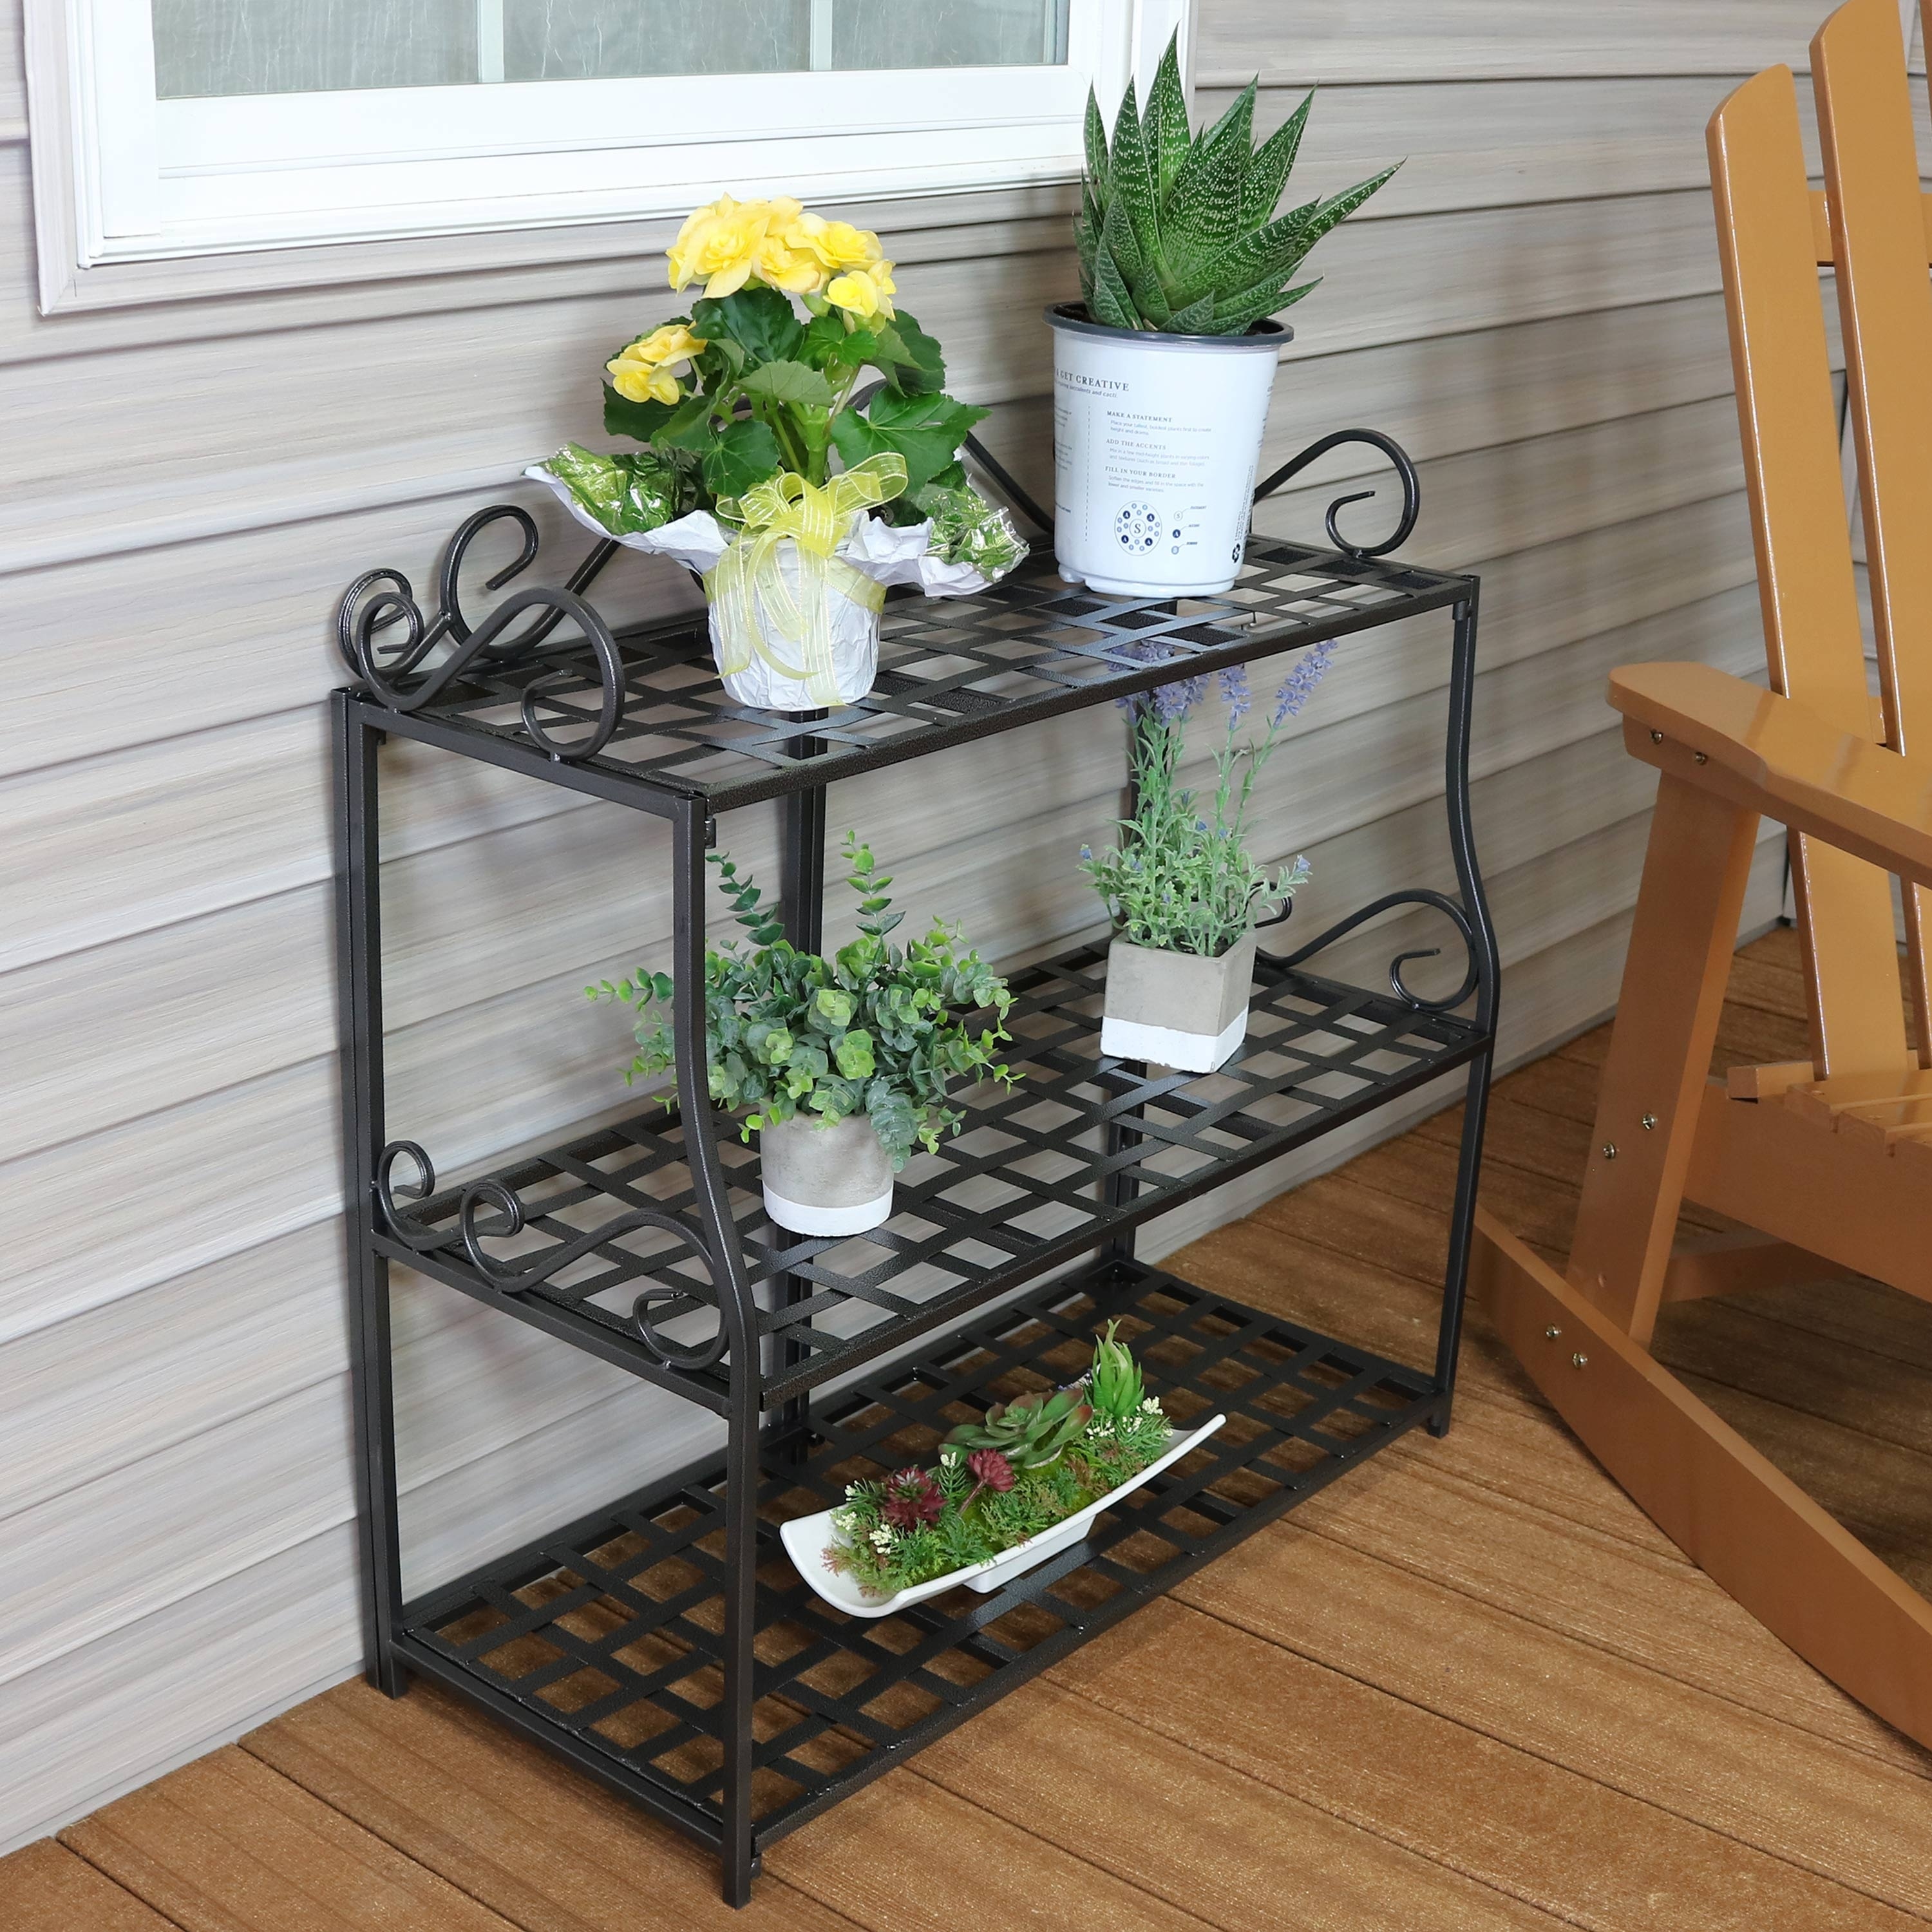 https://ak1.ostkcdn.com/images/products/is/images/direct/2751d58ca18099ecde4bd295d8ea16e69b584d01/Sunnydaze-3-Tier-Metal-Iron-Plant-Stand-with-Scroll-Edging.jpg